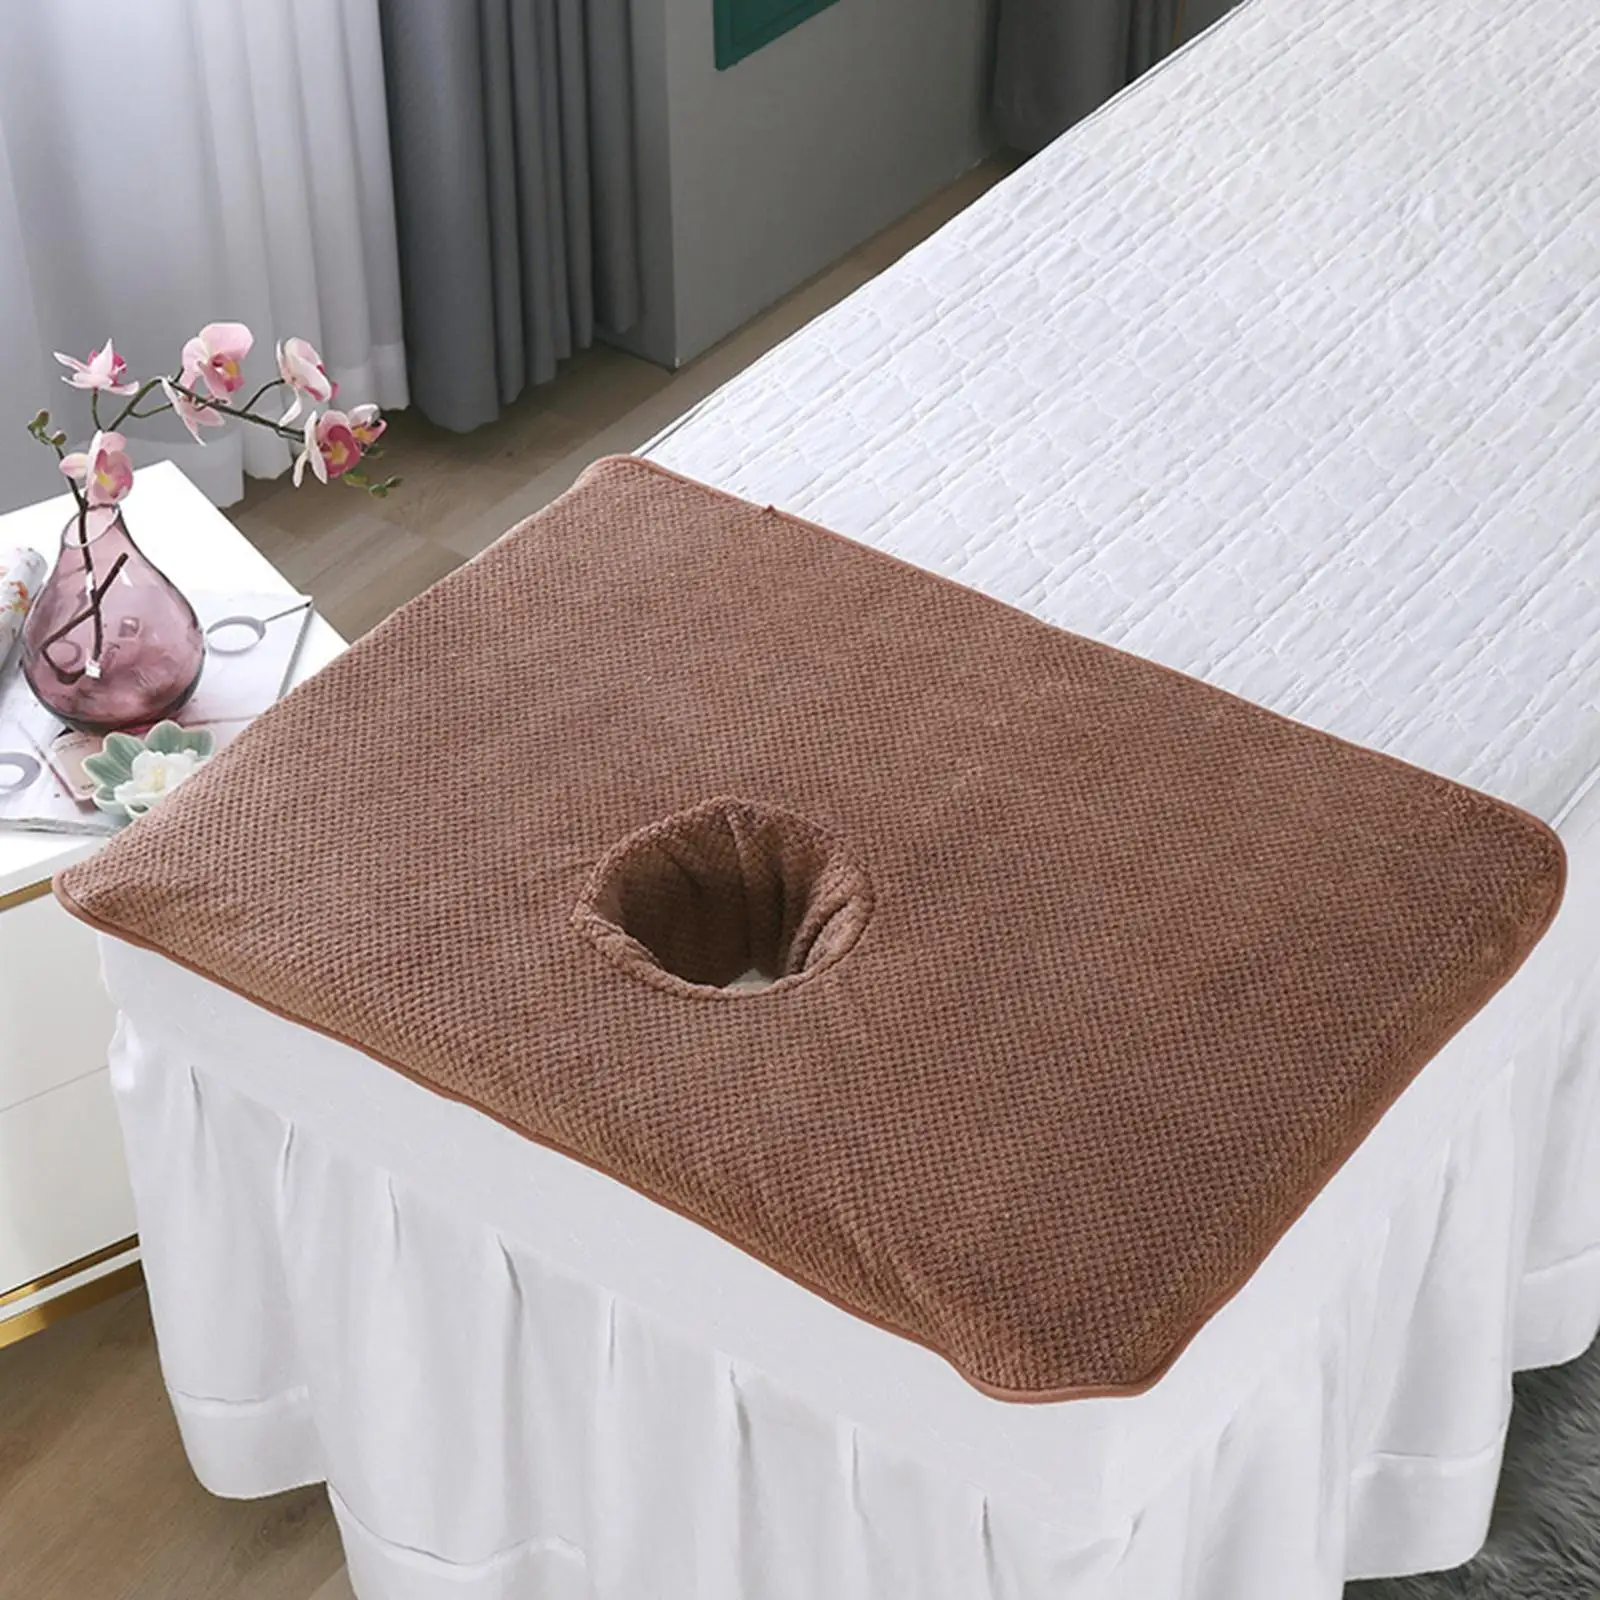 Massage Bed Cover Protector Universal with Breath Hole Washable Soft Reusable SPA Bed Sheet for SPA Massage Tables Bed 50x80cm